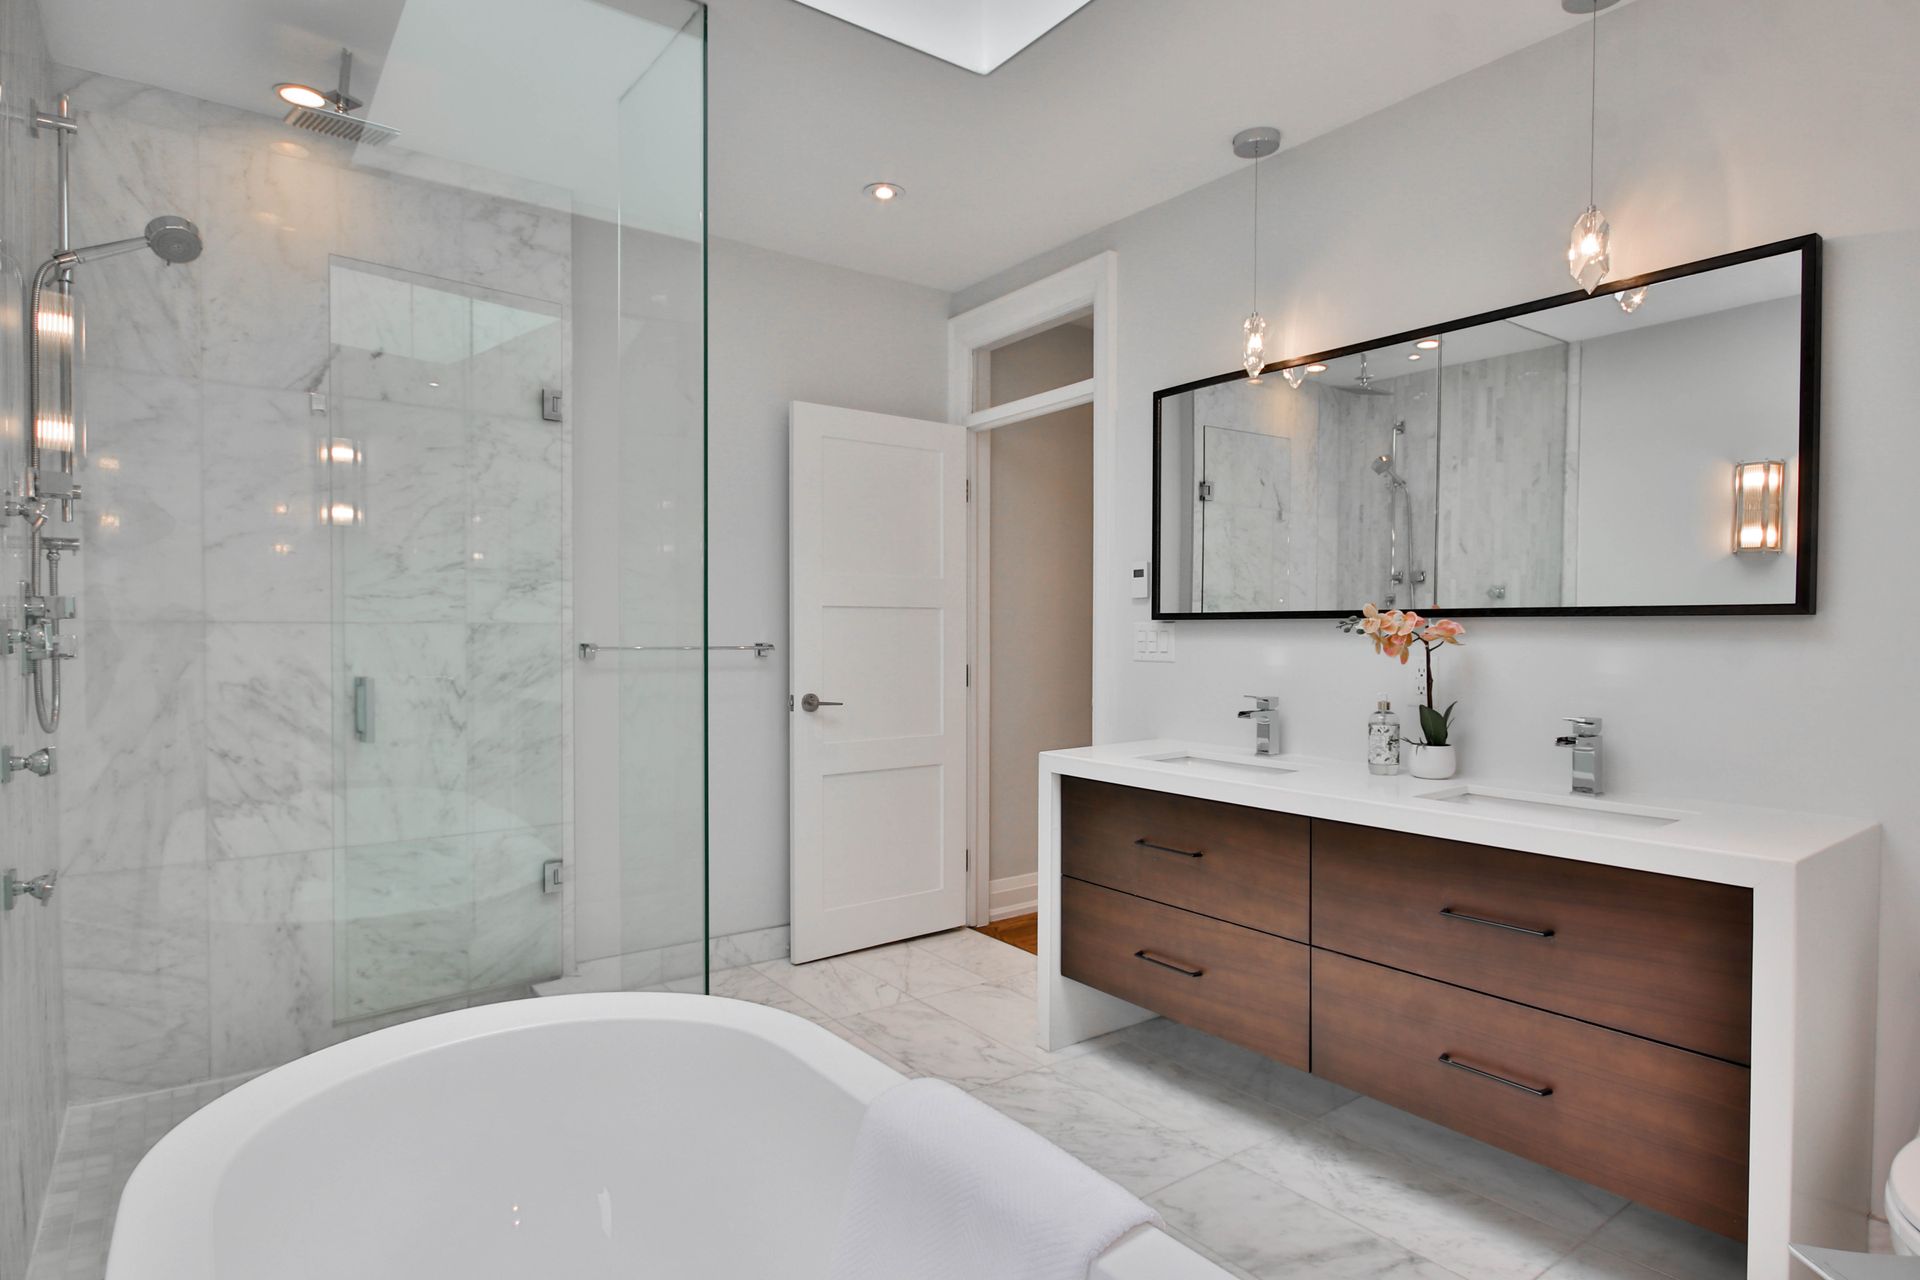 Upgrade Your Naples Area Bathroom With Help From the Home Contractors & Sigma Construction Group.